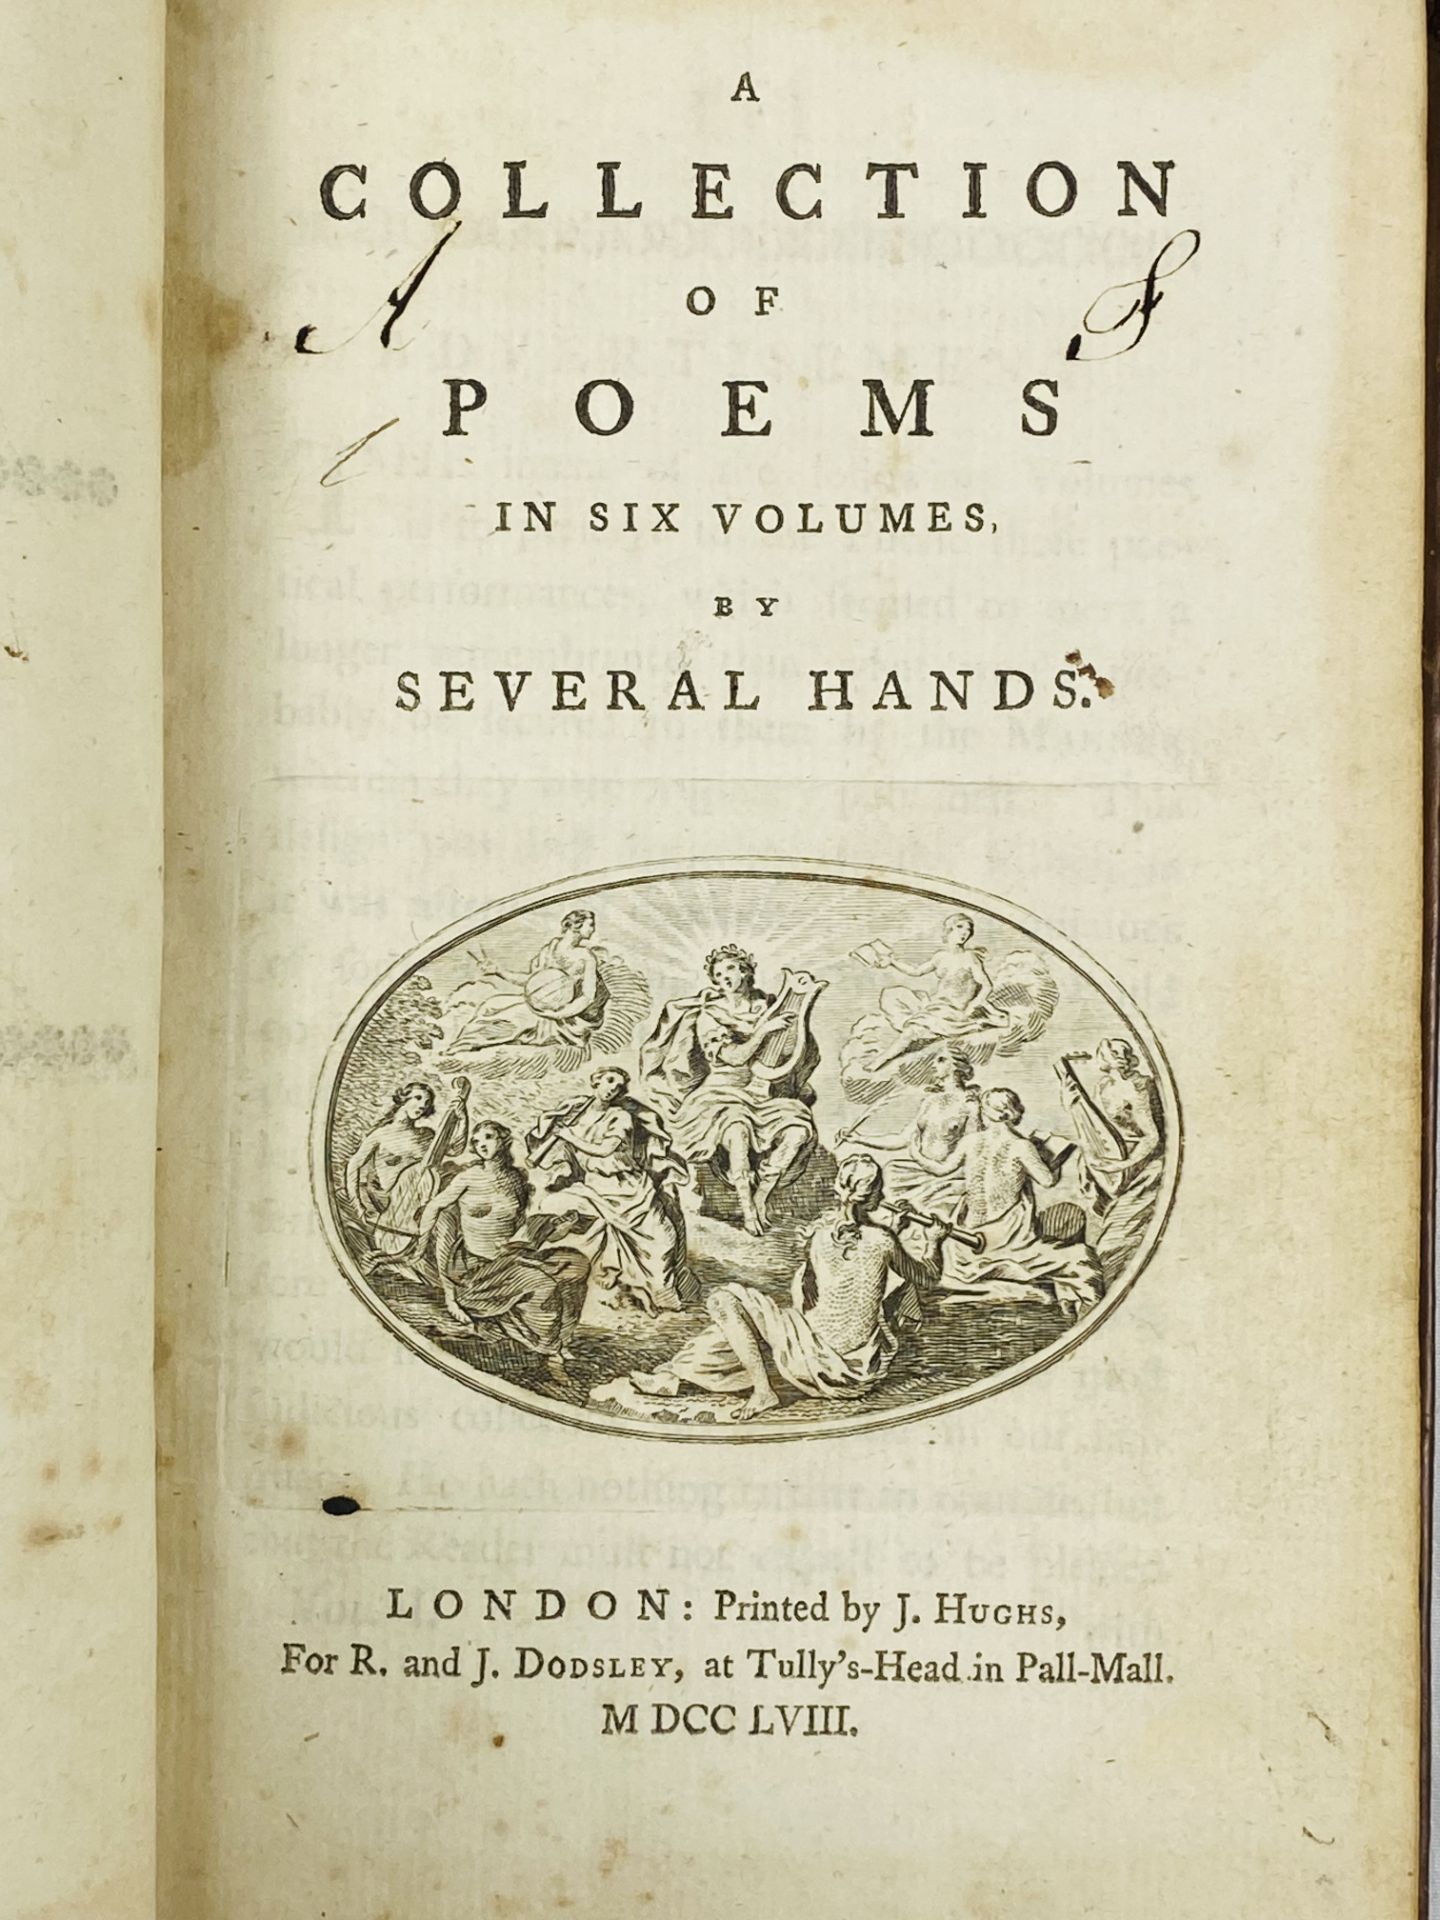 A Collection of Poems in Six Volumes by Several Hands, 1758 - Image 2 of 3